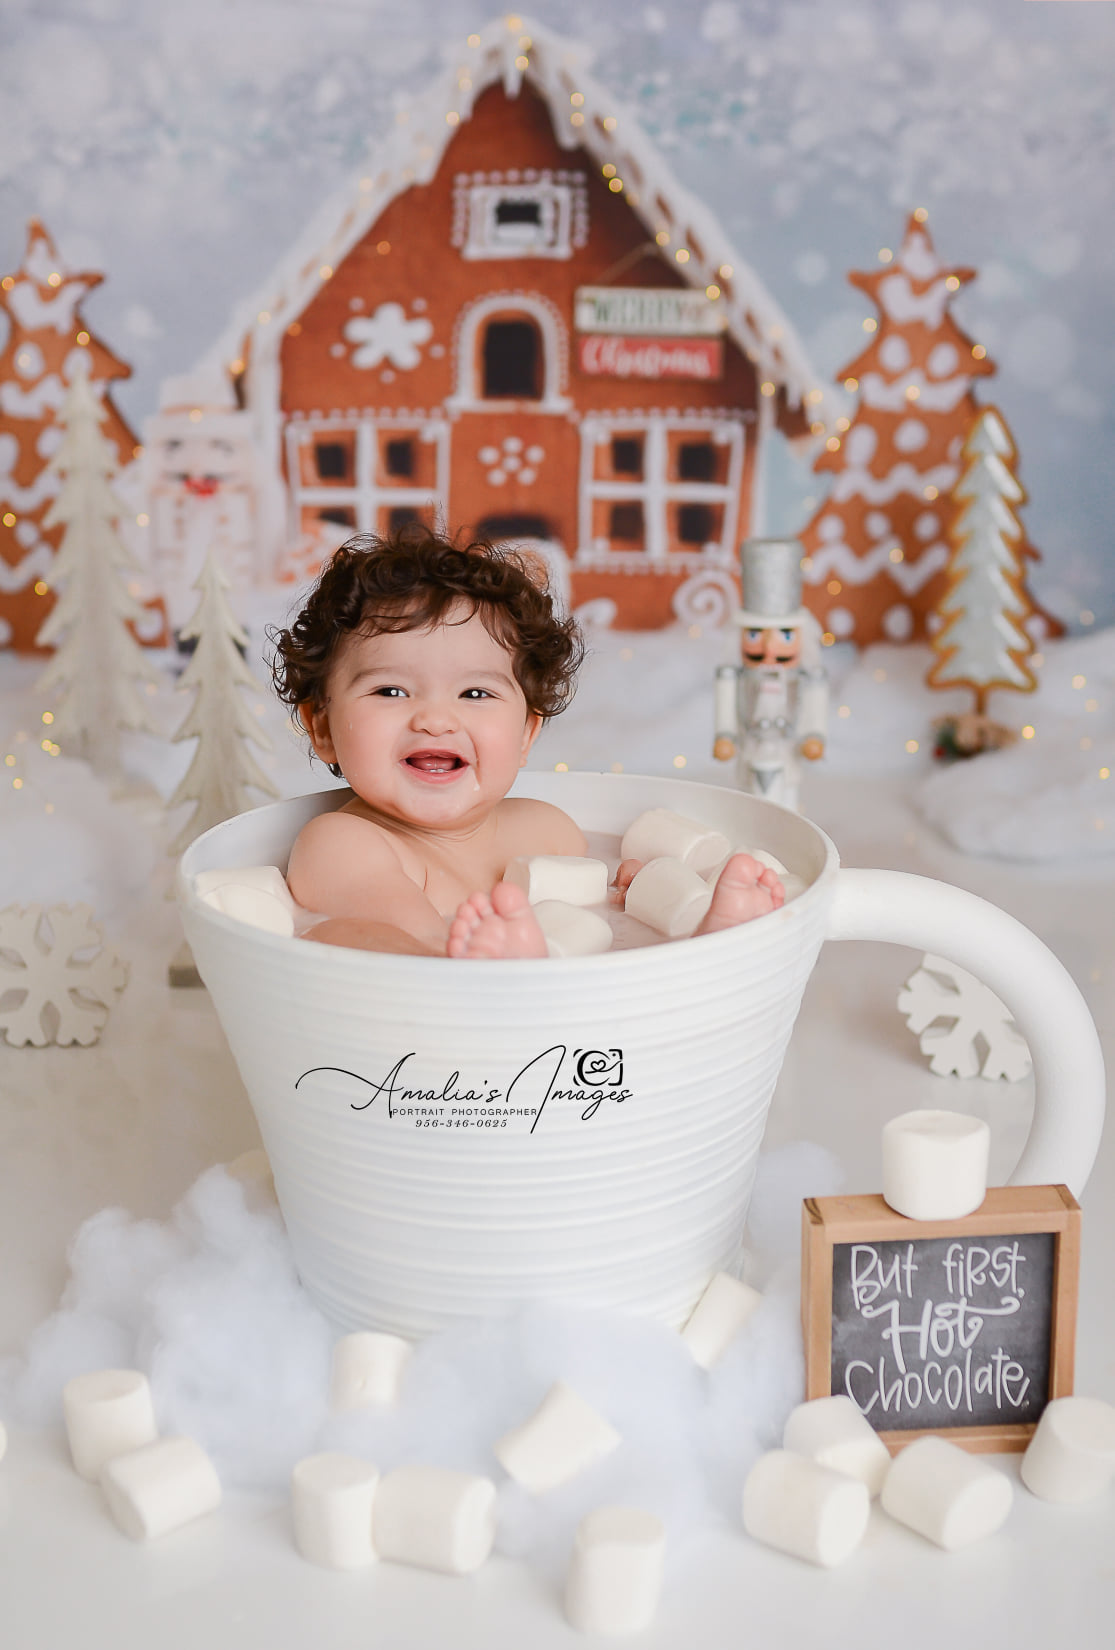 donna hewell recommends hot chocolate photoshoot pic